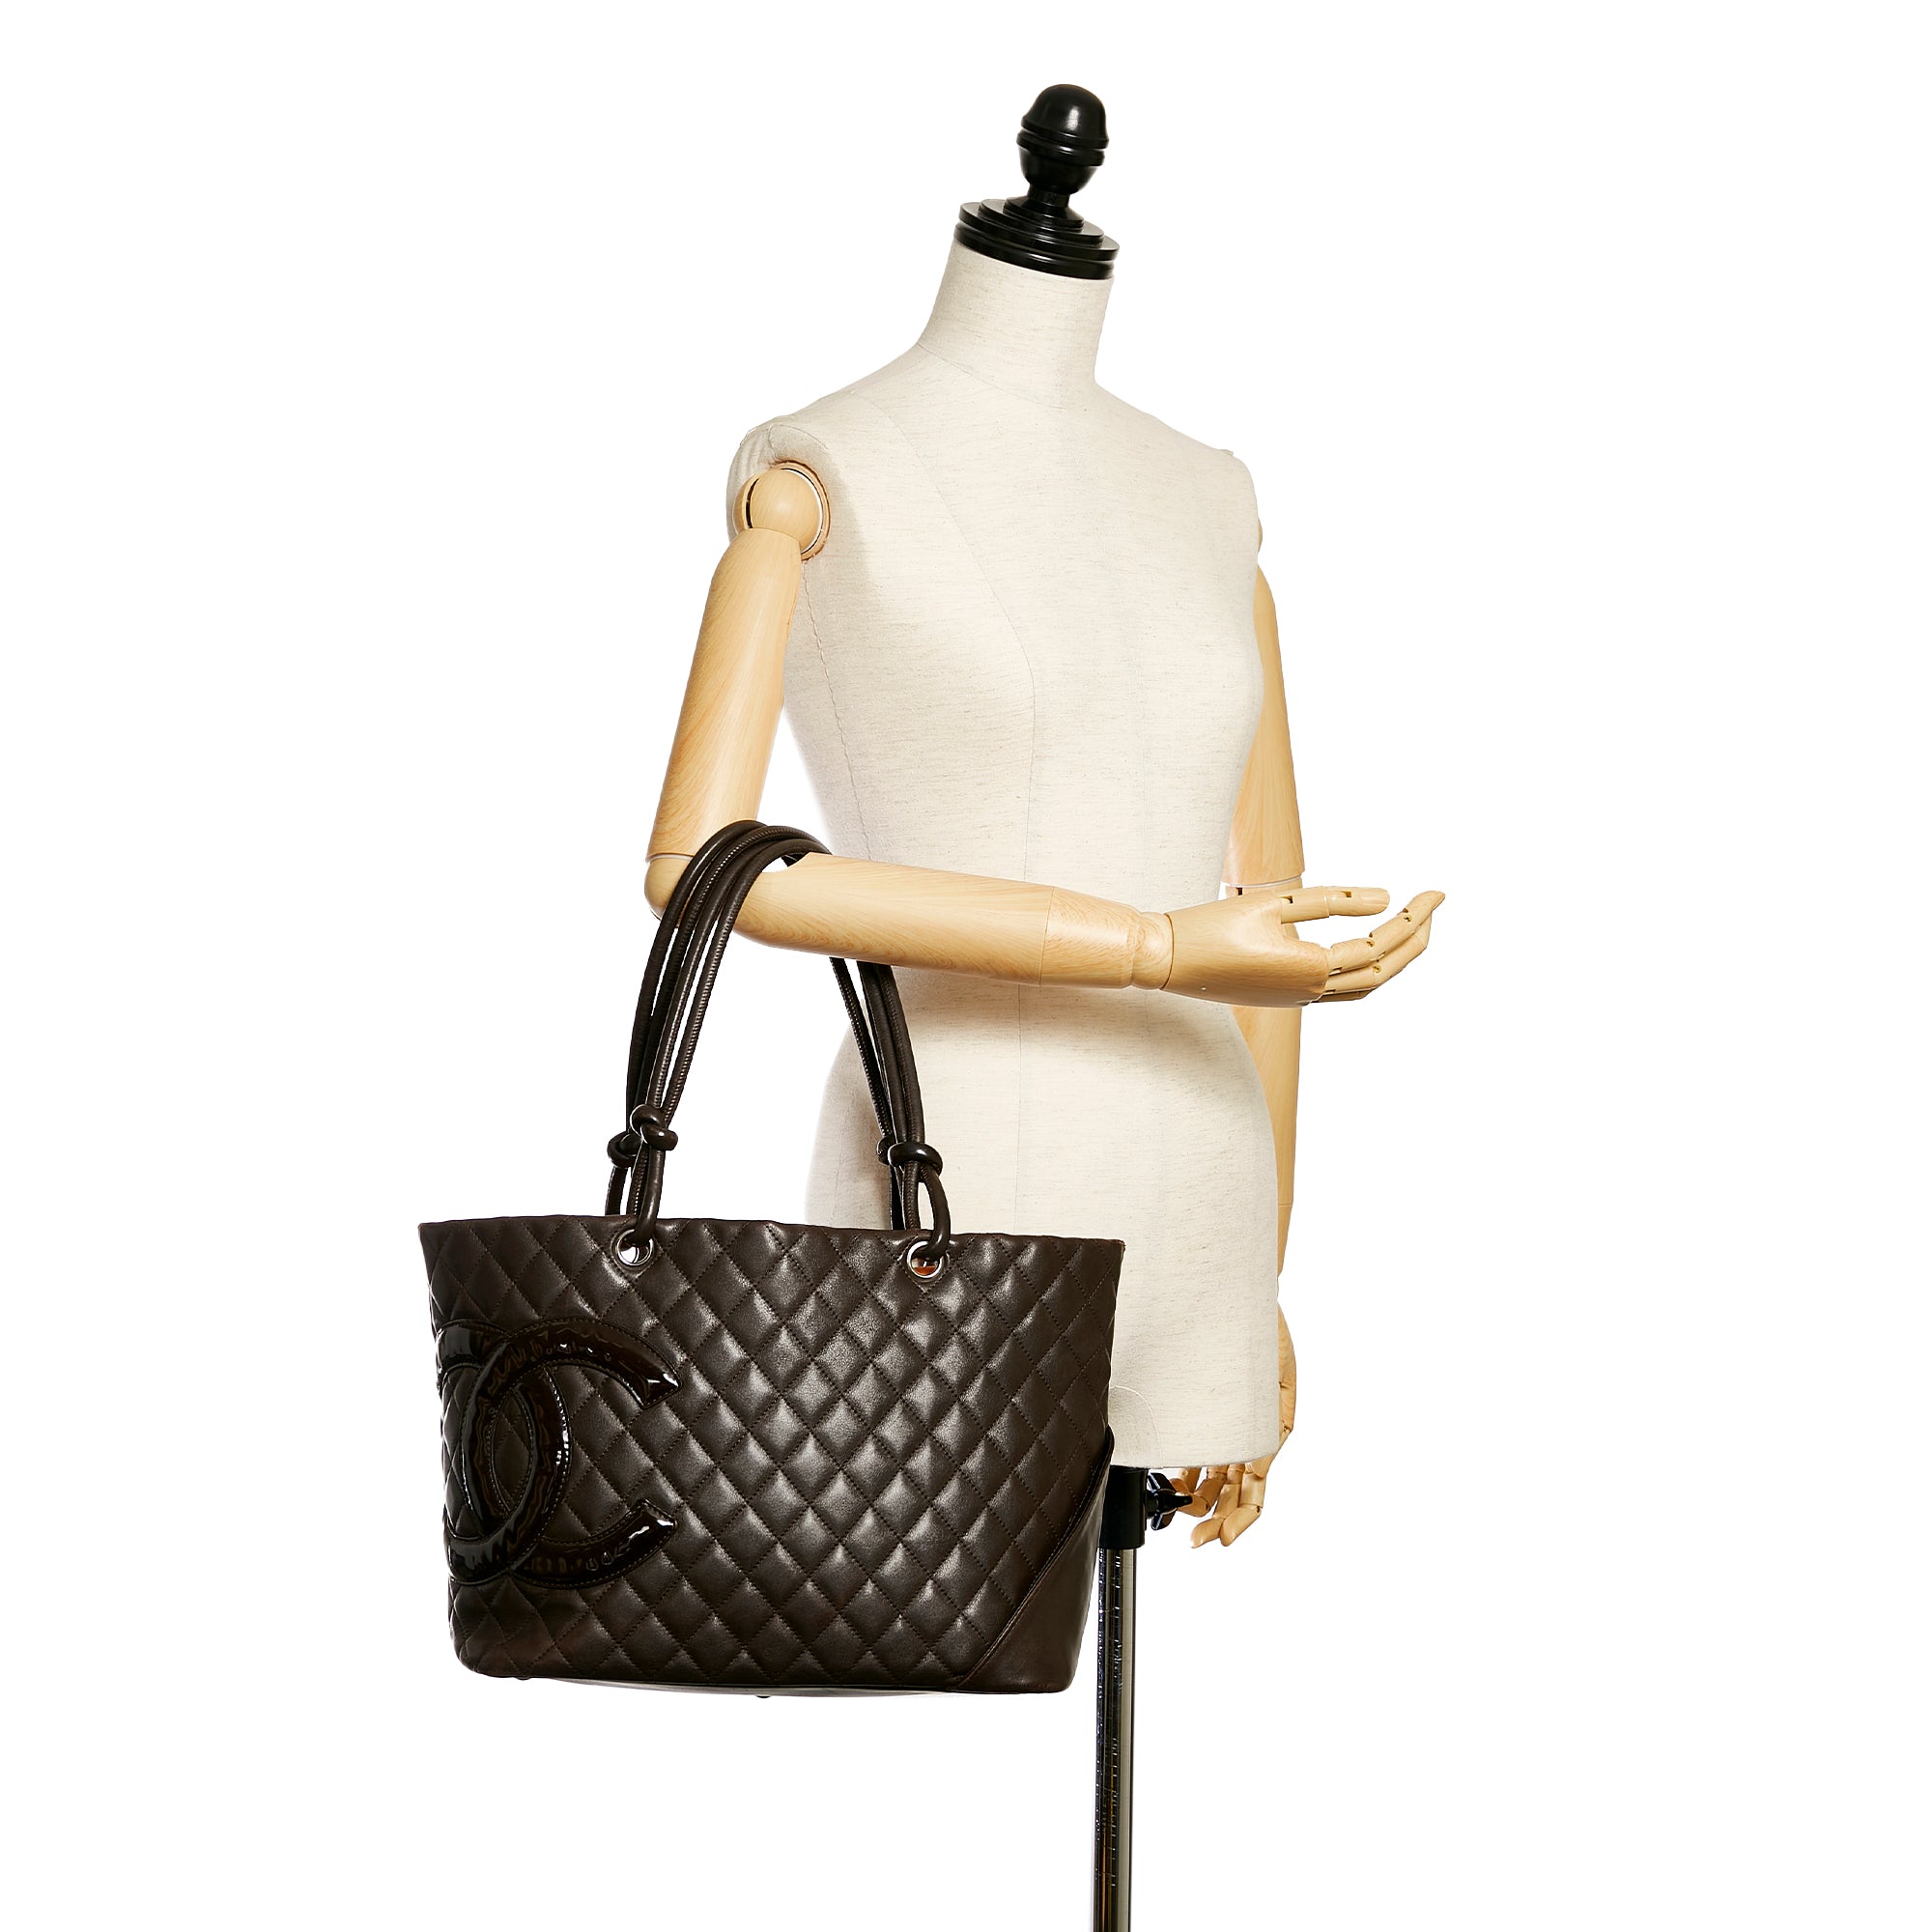 CHANEL Calfskin Quilted Medium Cambon Tote White Black 1174570